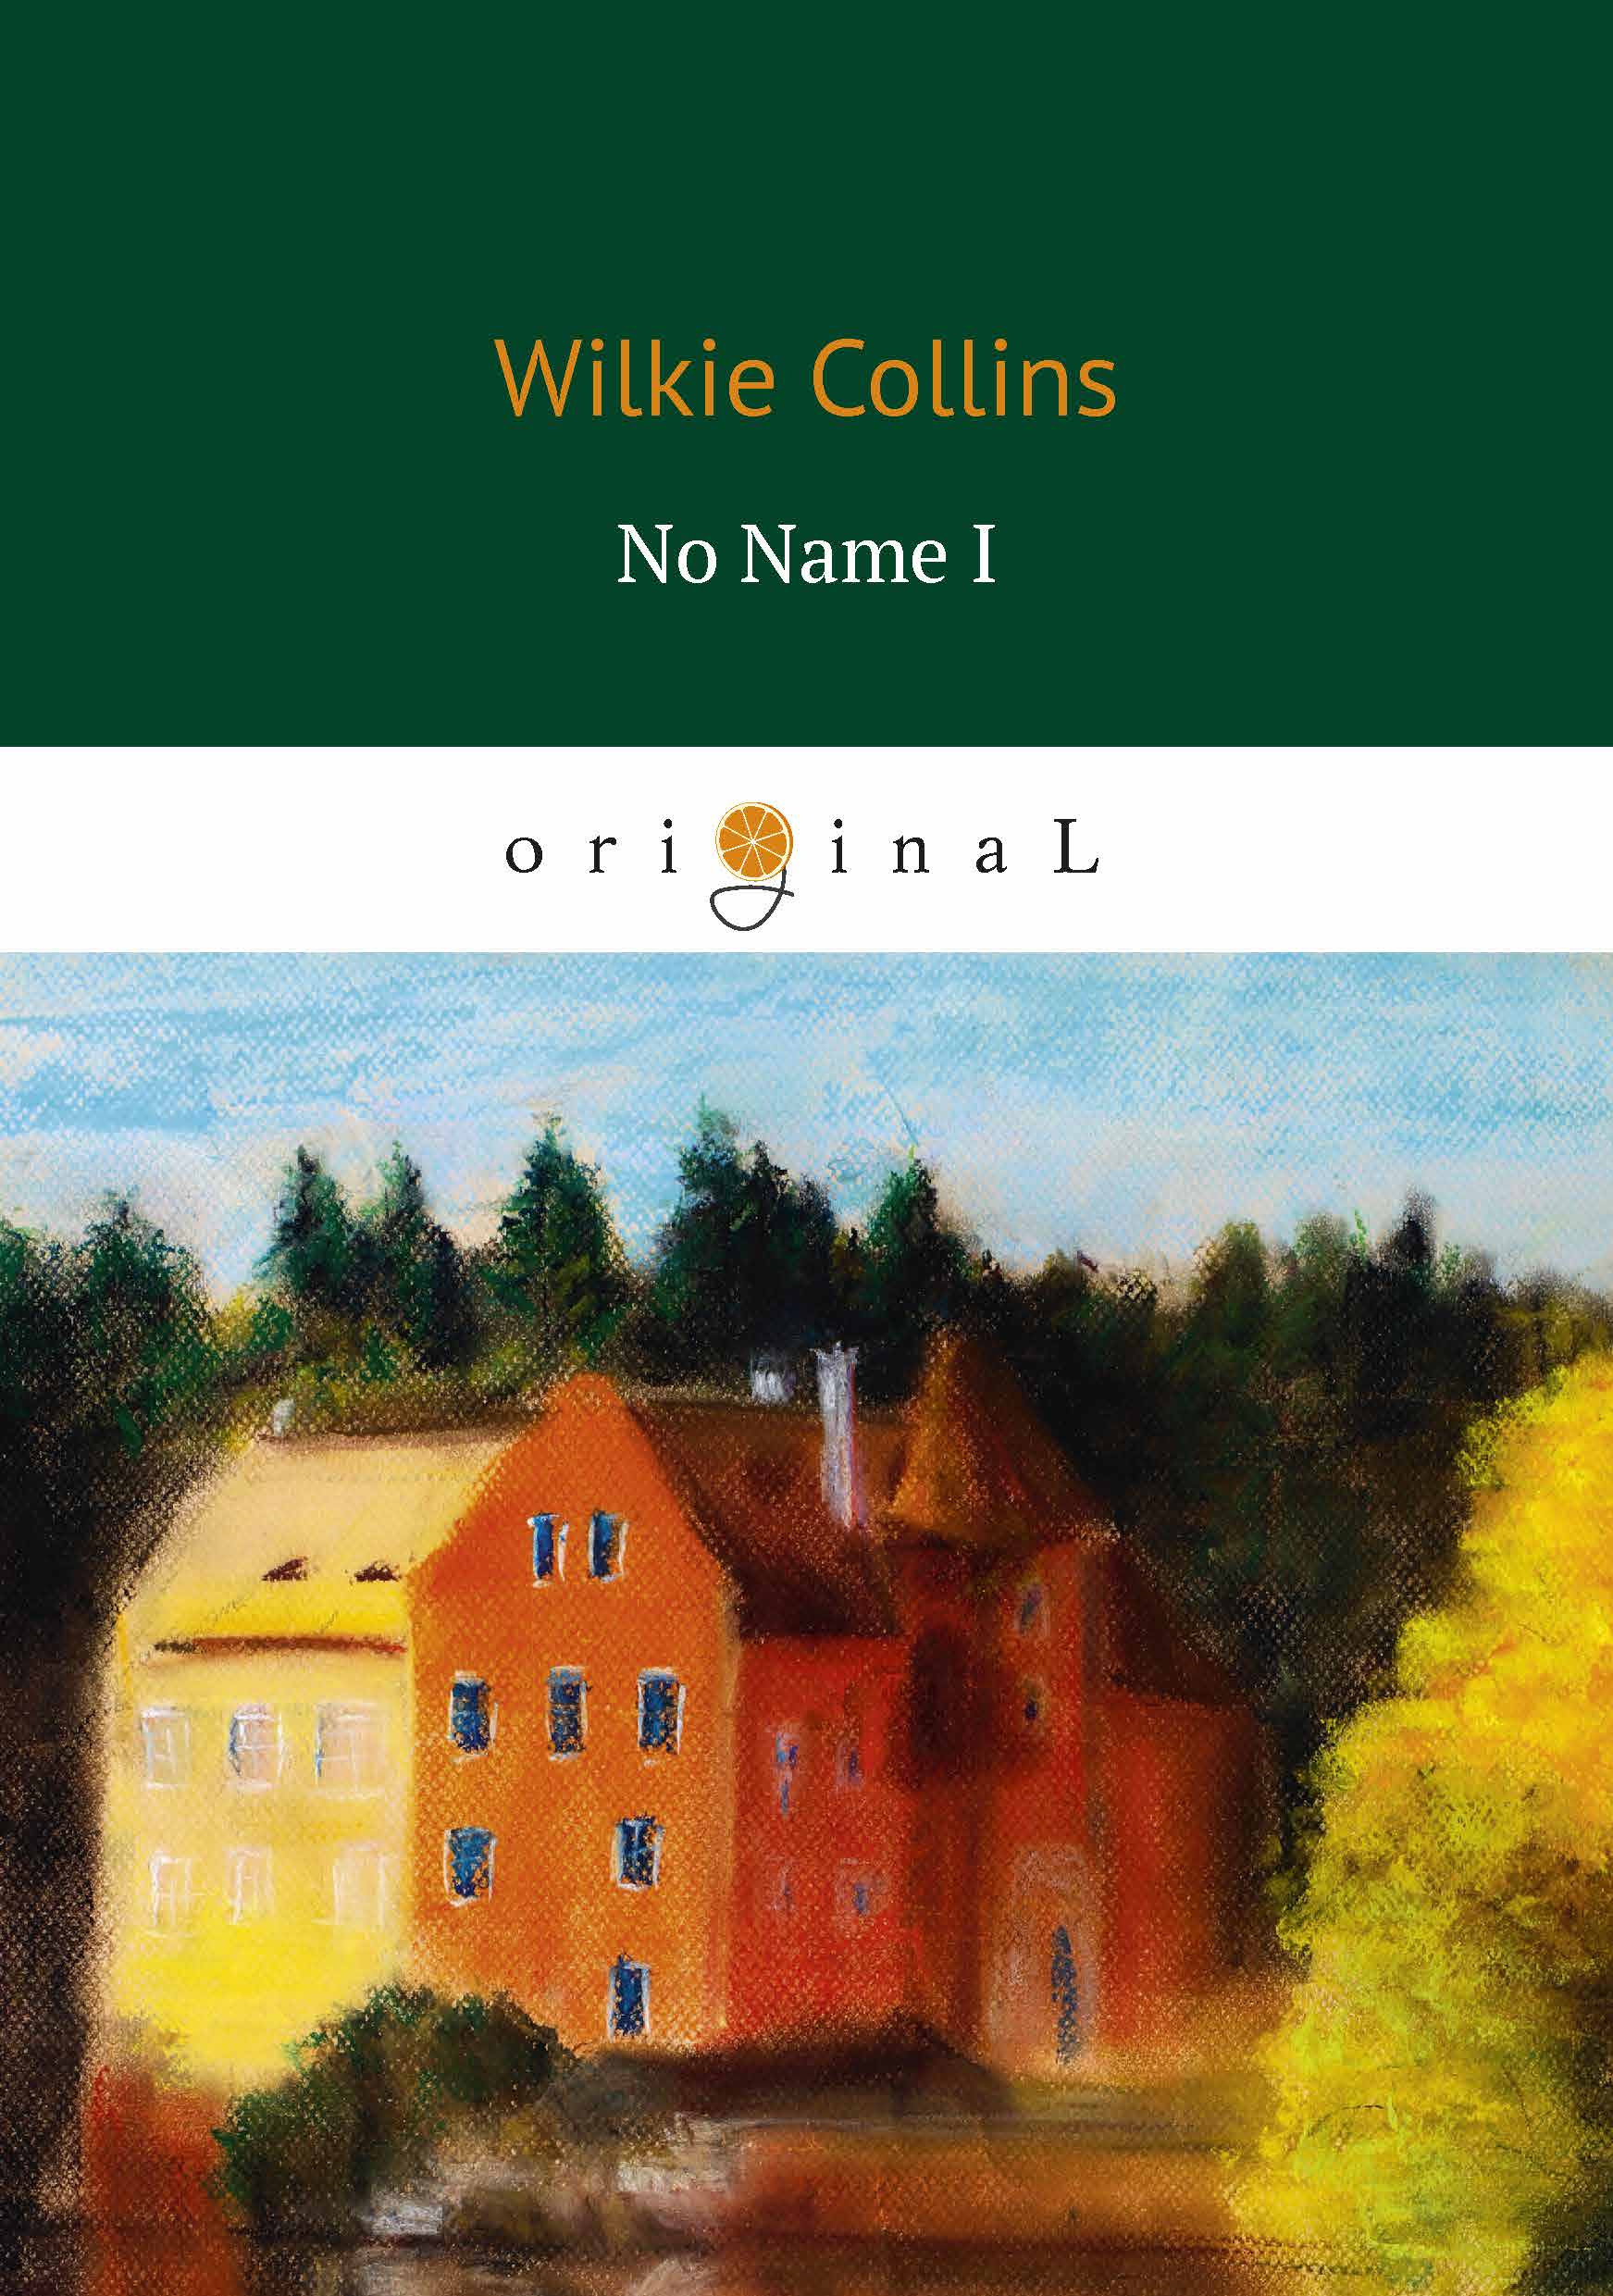 No Name I. Wilkie Collins